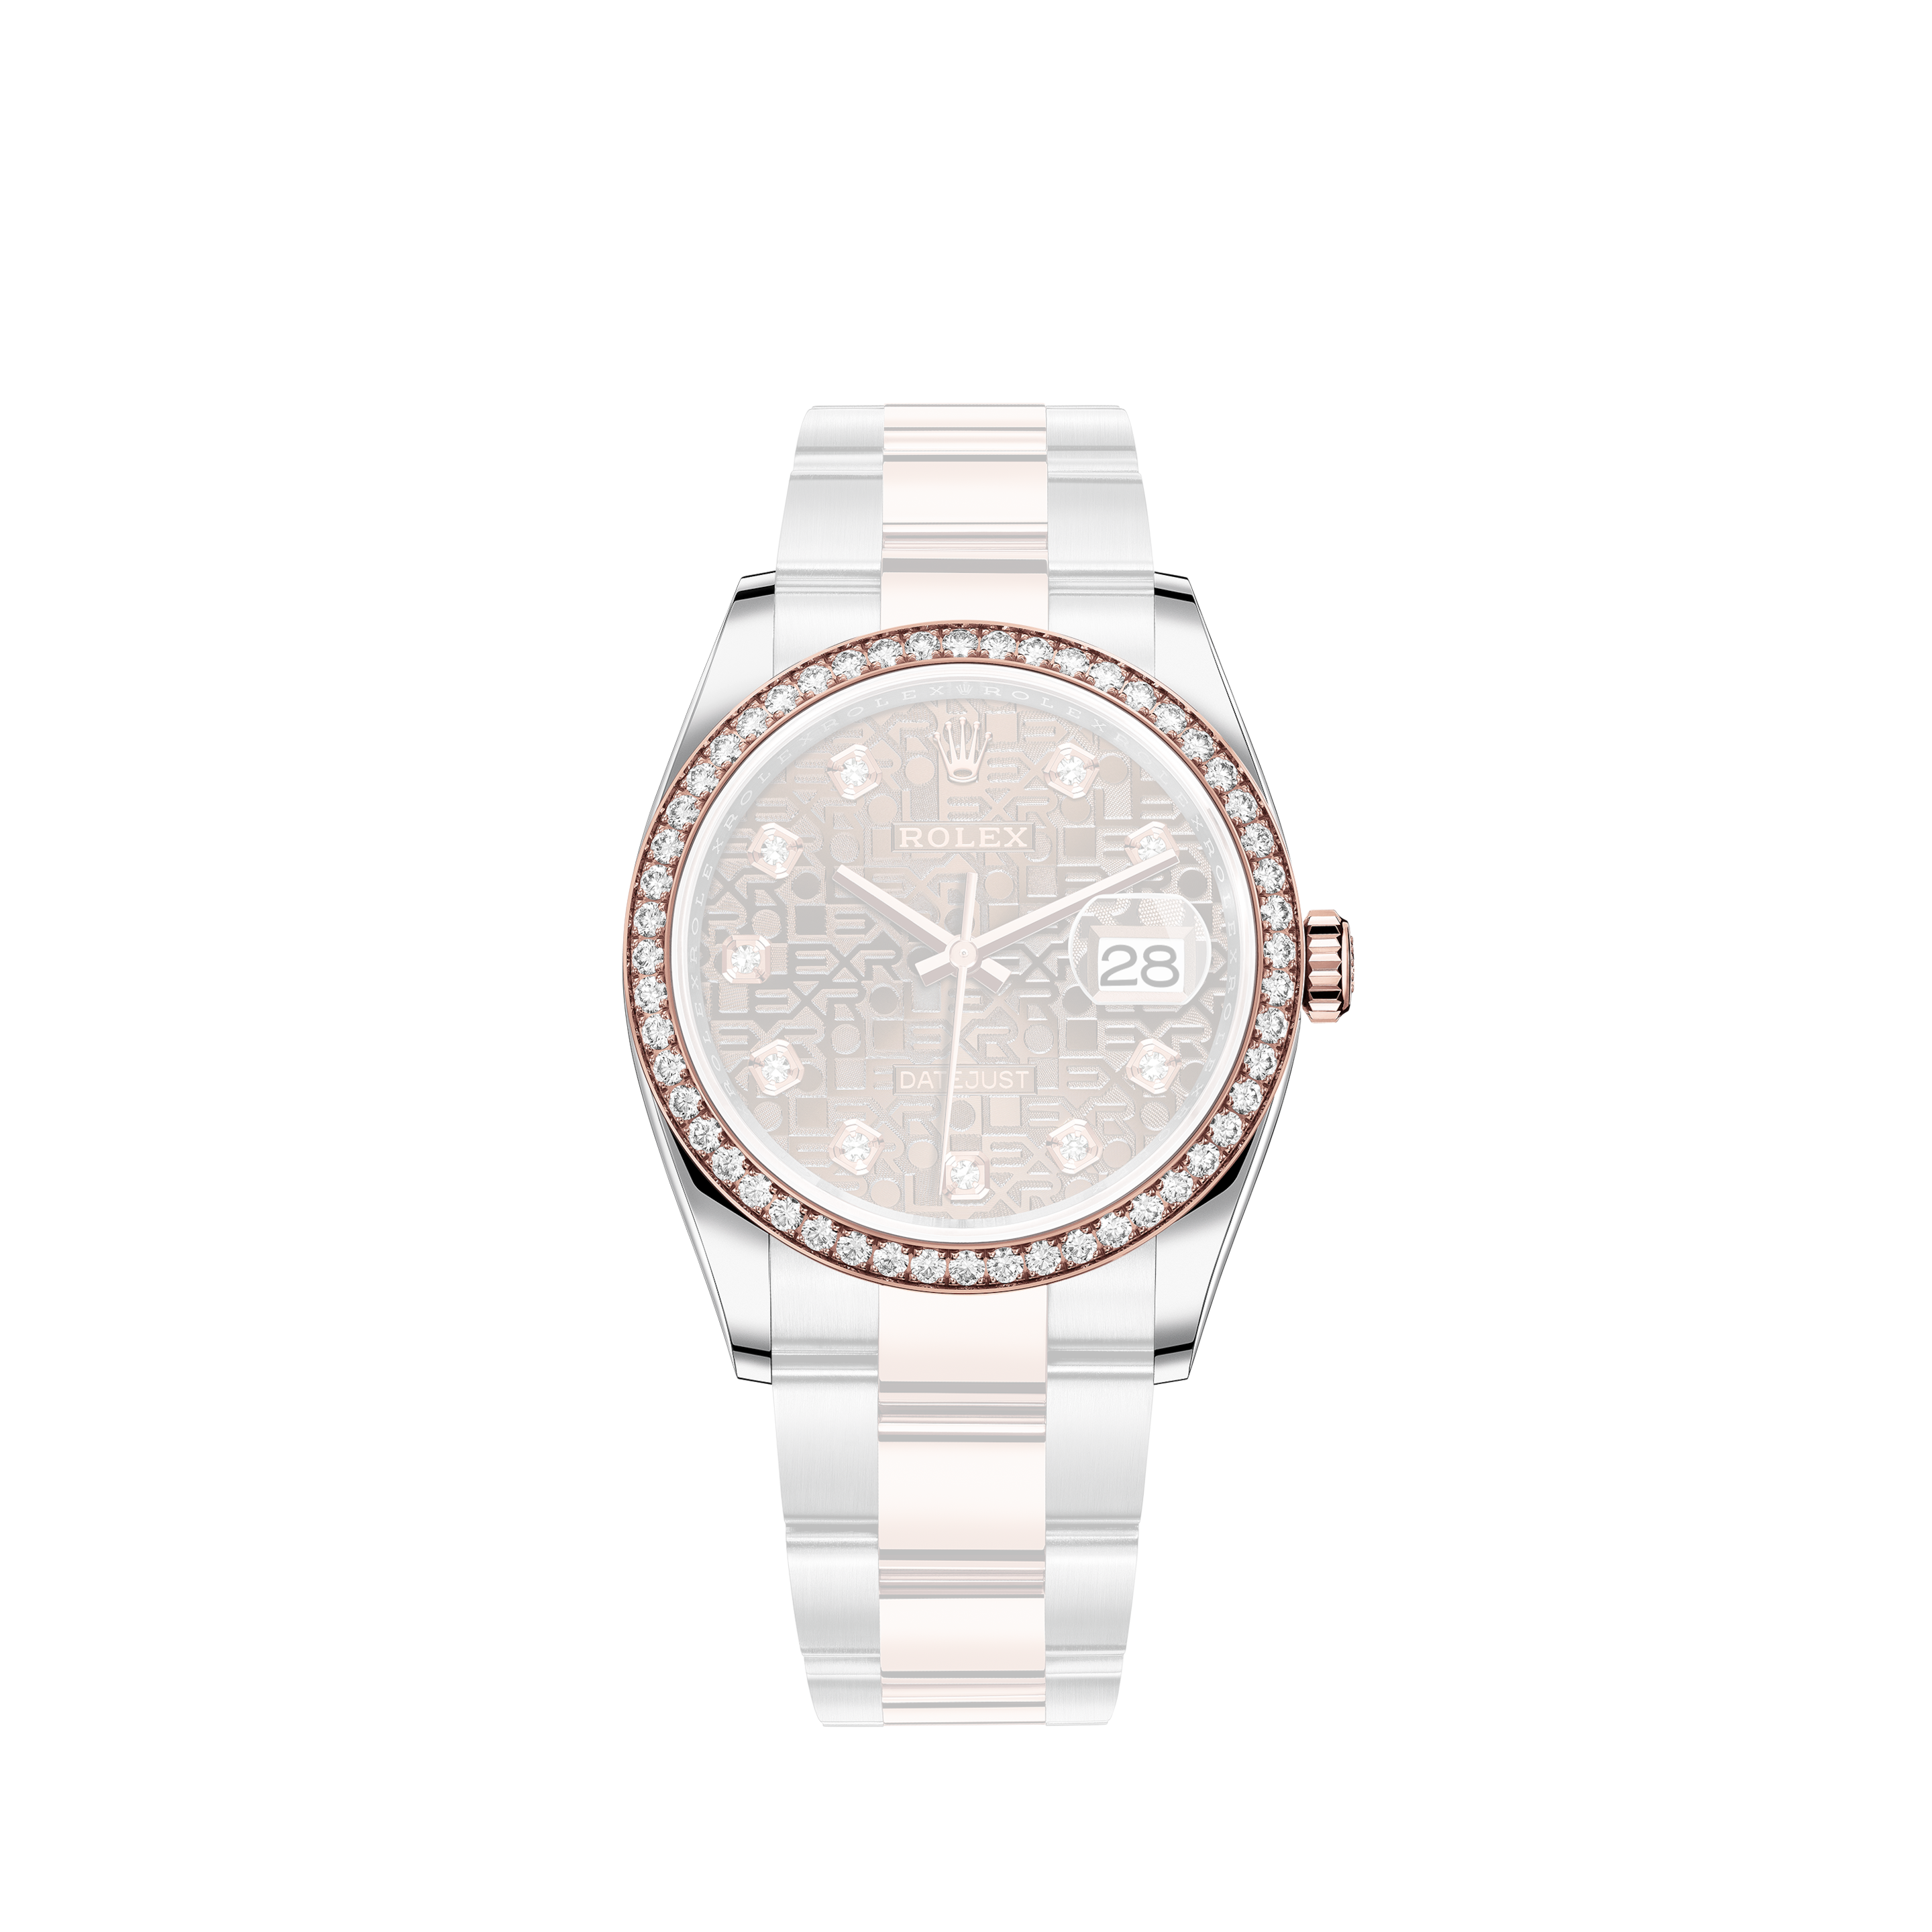 Rolex Emerald and Diamond 36mm Datejust Pink Flower MOP Mother of Pearl Dial Watch with Diamond Accent watchRolex Emerald and Diamond 36mm Datejust Pink MOP Mother Of Pearl Dial Watch with Diamond Accent watch